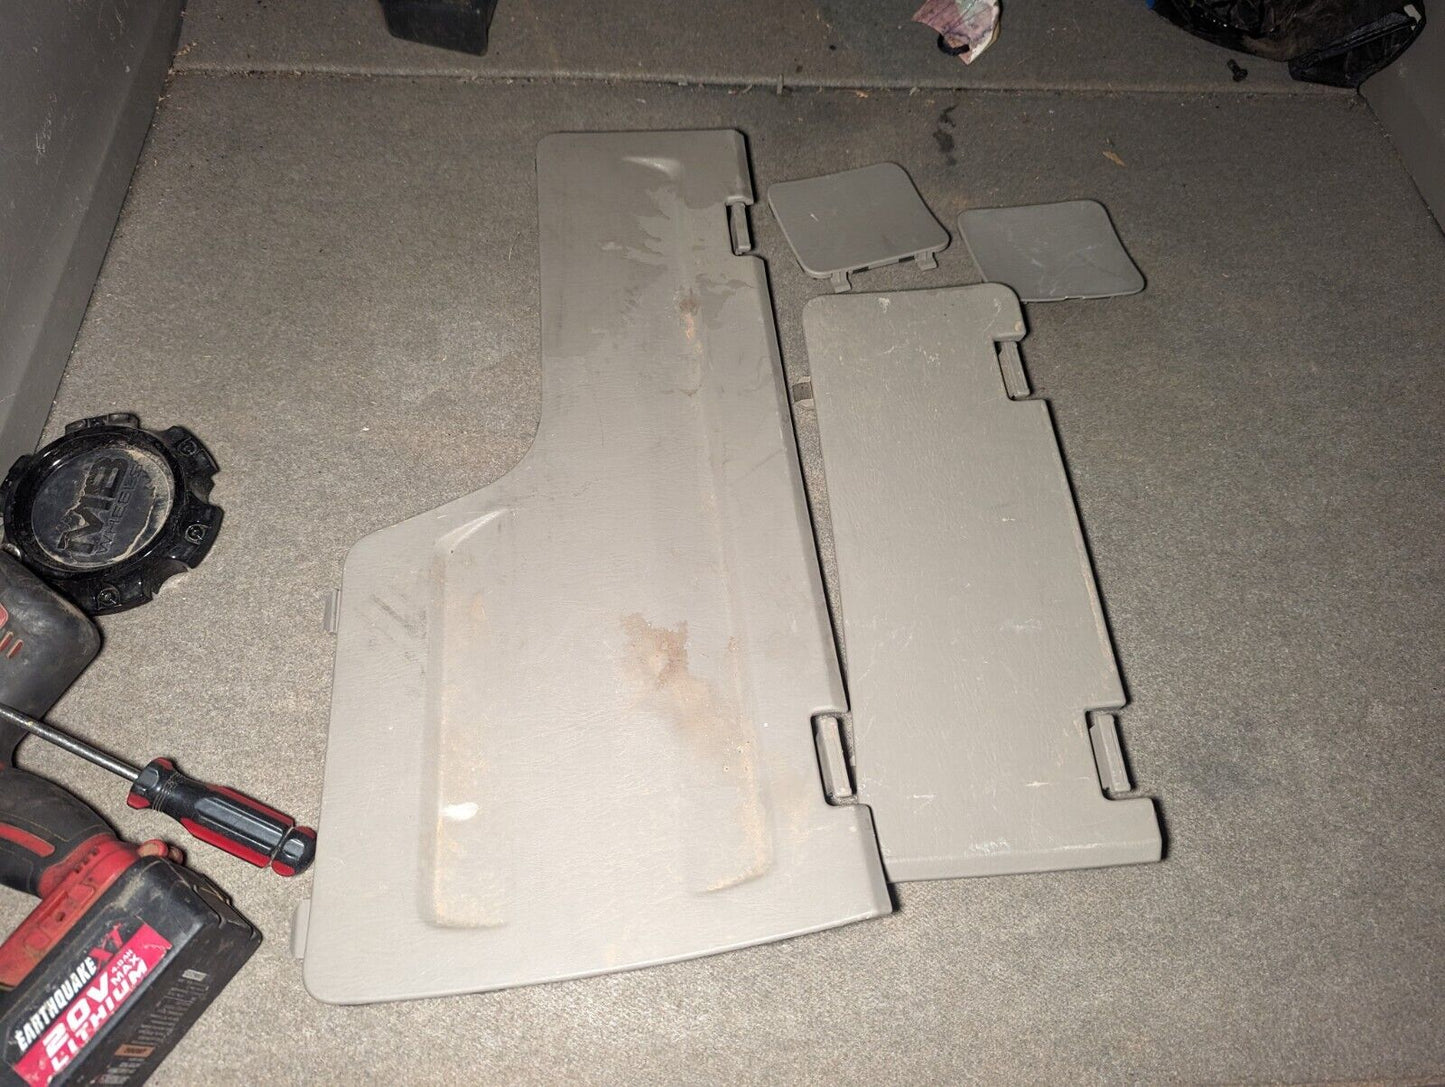 03 04 05 06 07 08 09 TOYOTA 4RUNNER REAR TRUNK JACK HOLE STORAGE COVERS (SET)